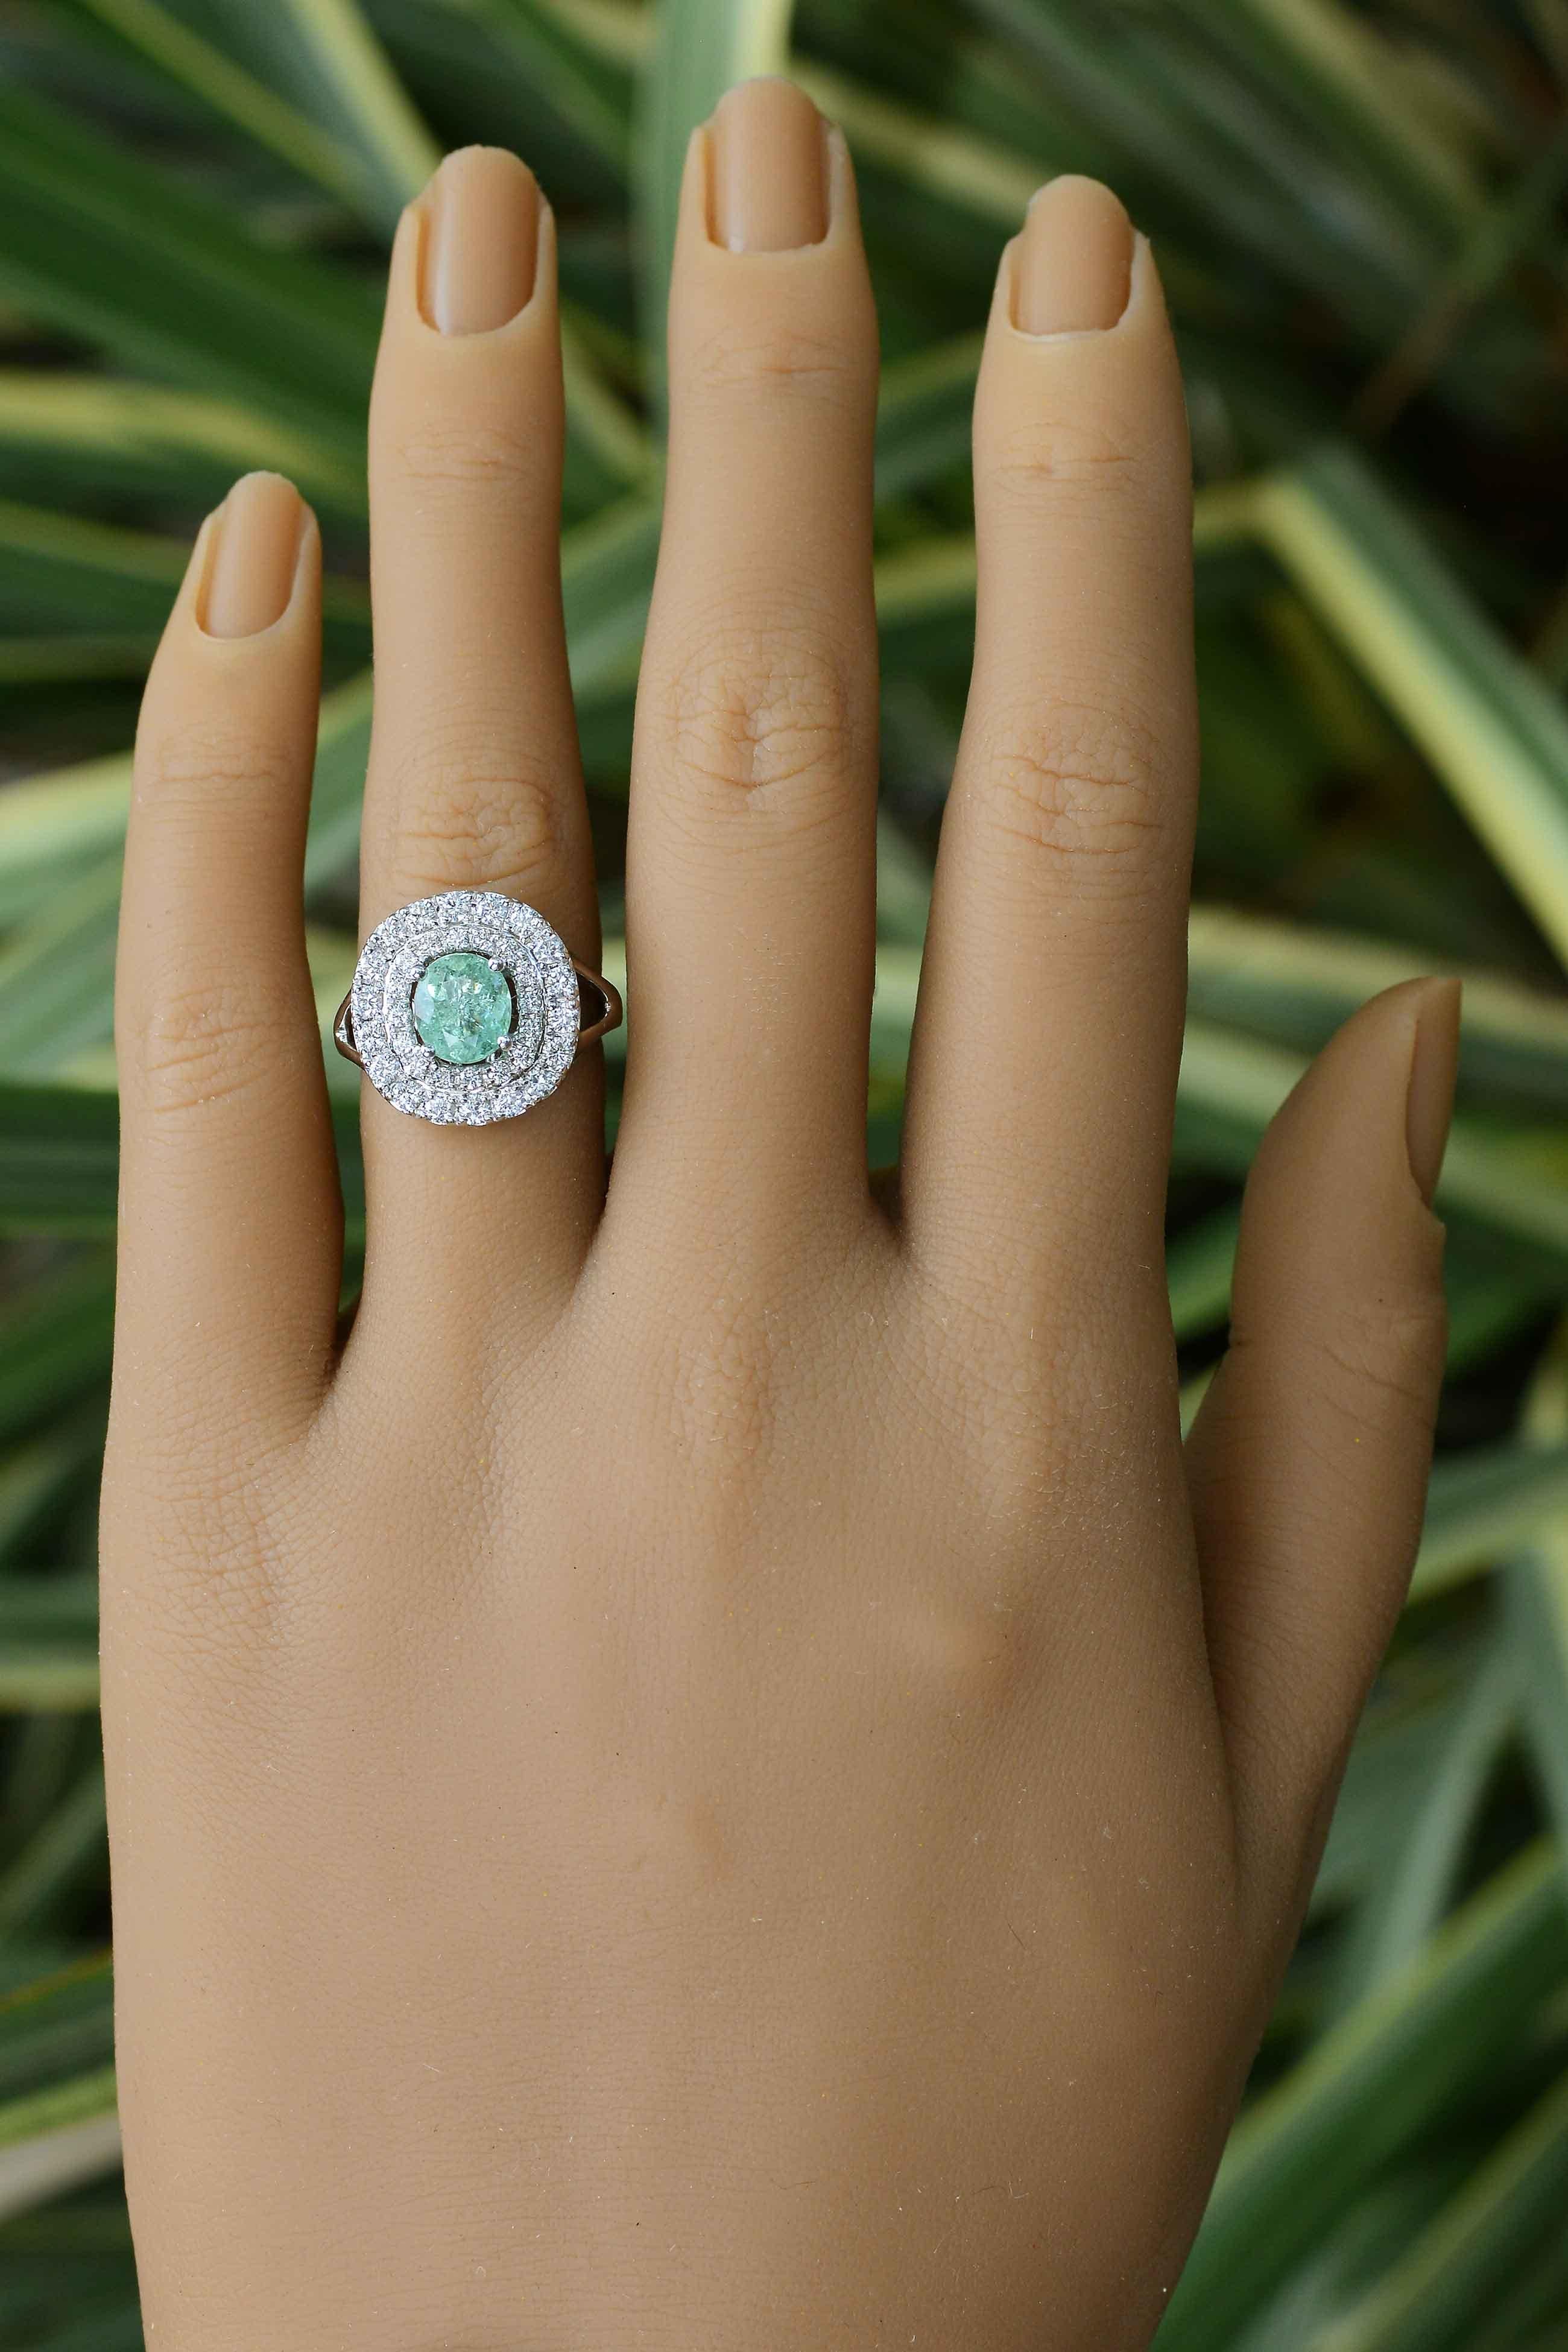 The Princeton Paraiba tourmaline engagement ring with a dazzling, double diamond halo makes for an astonishing gemstone bridal treasure or cocktail ring. The central gem is certified by the Gemological Institute Laboratories as natural Paraiba and